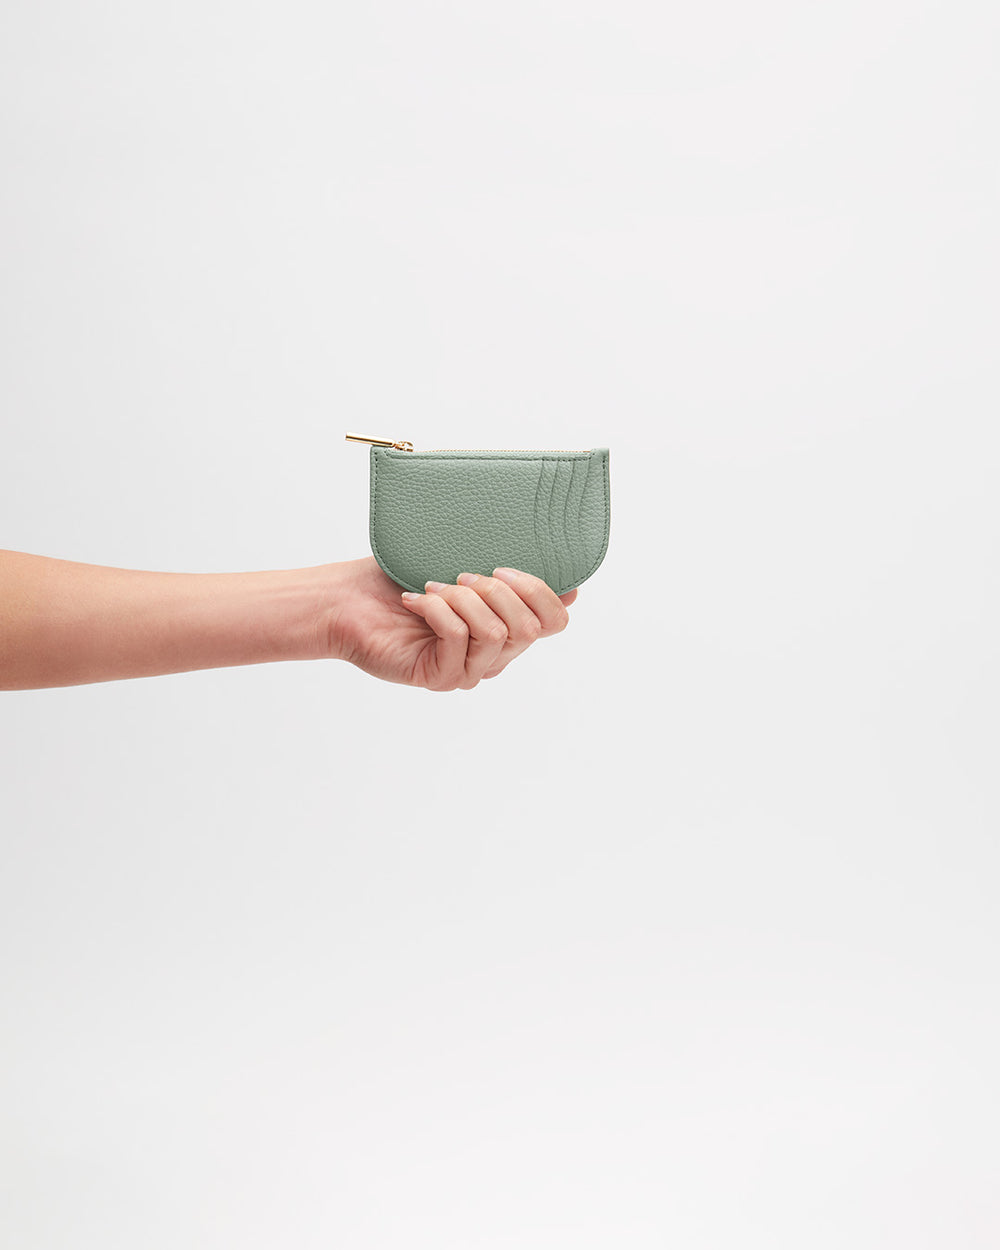 Hand holding a small purse with a zipper.